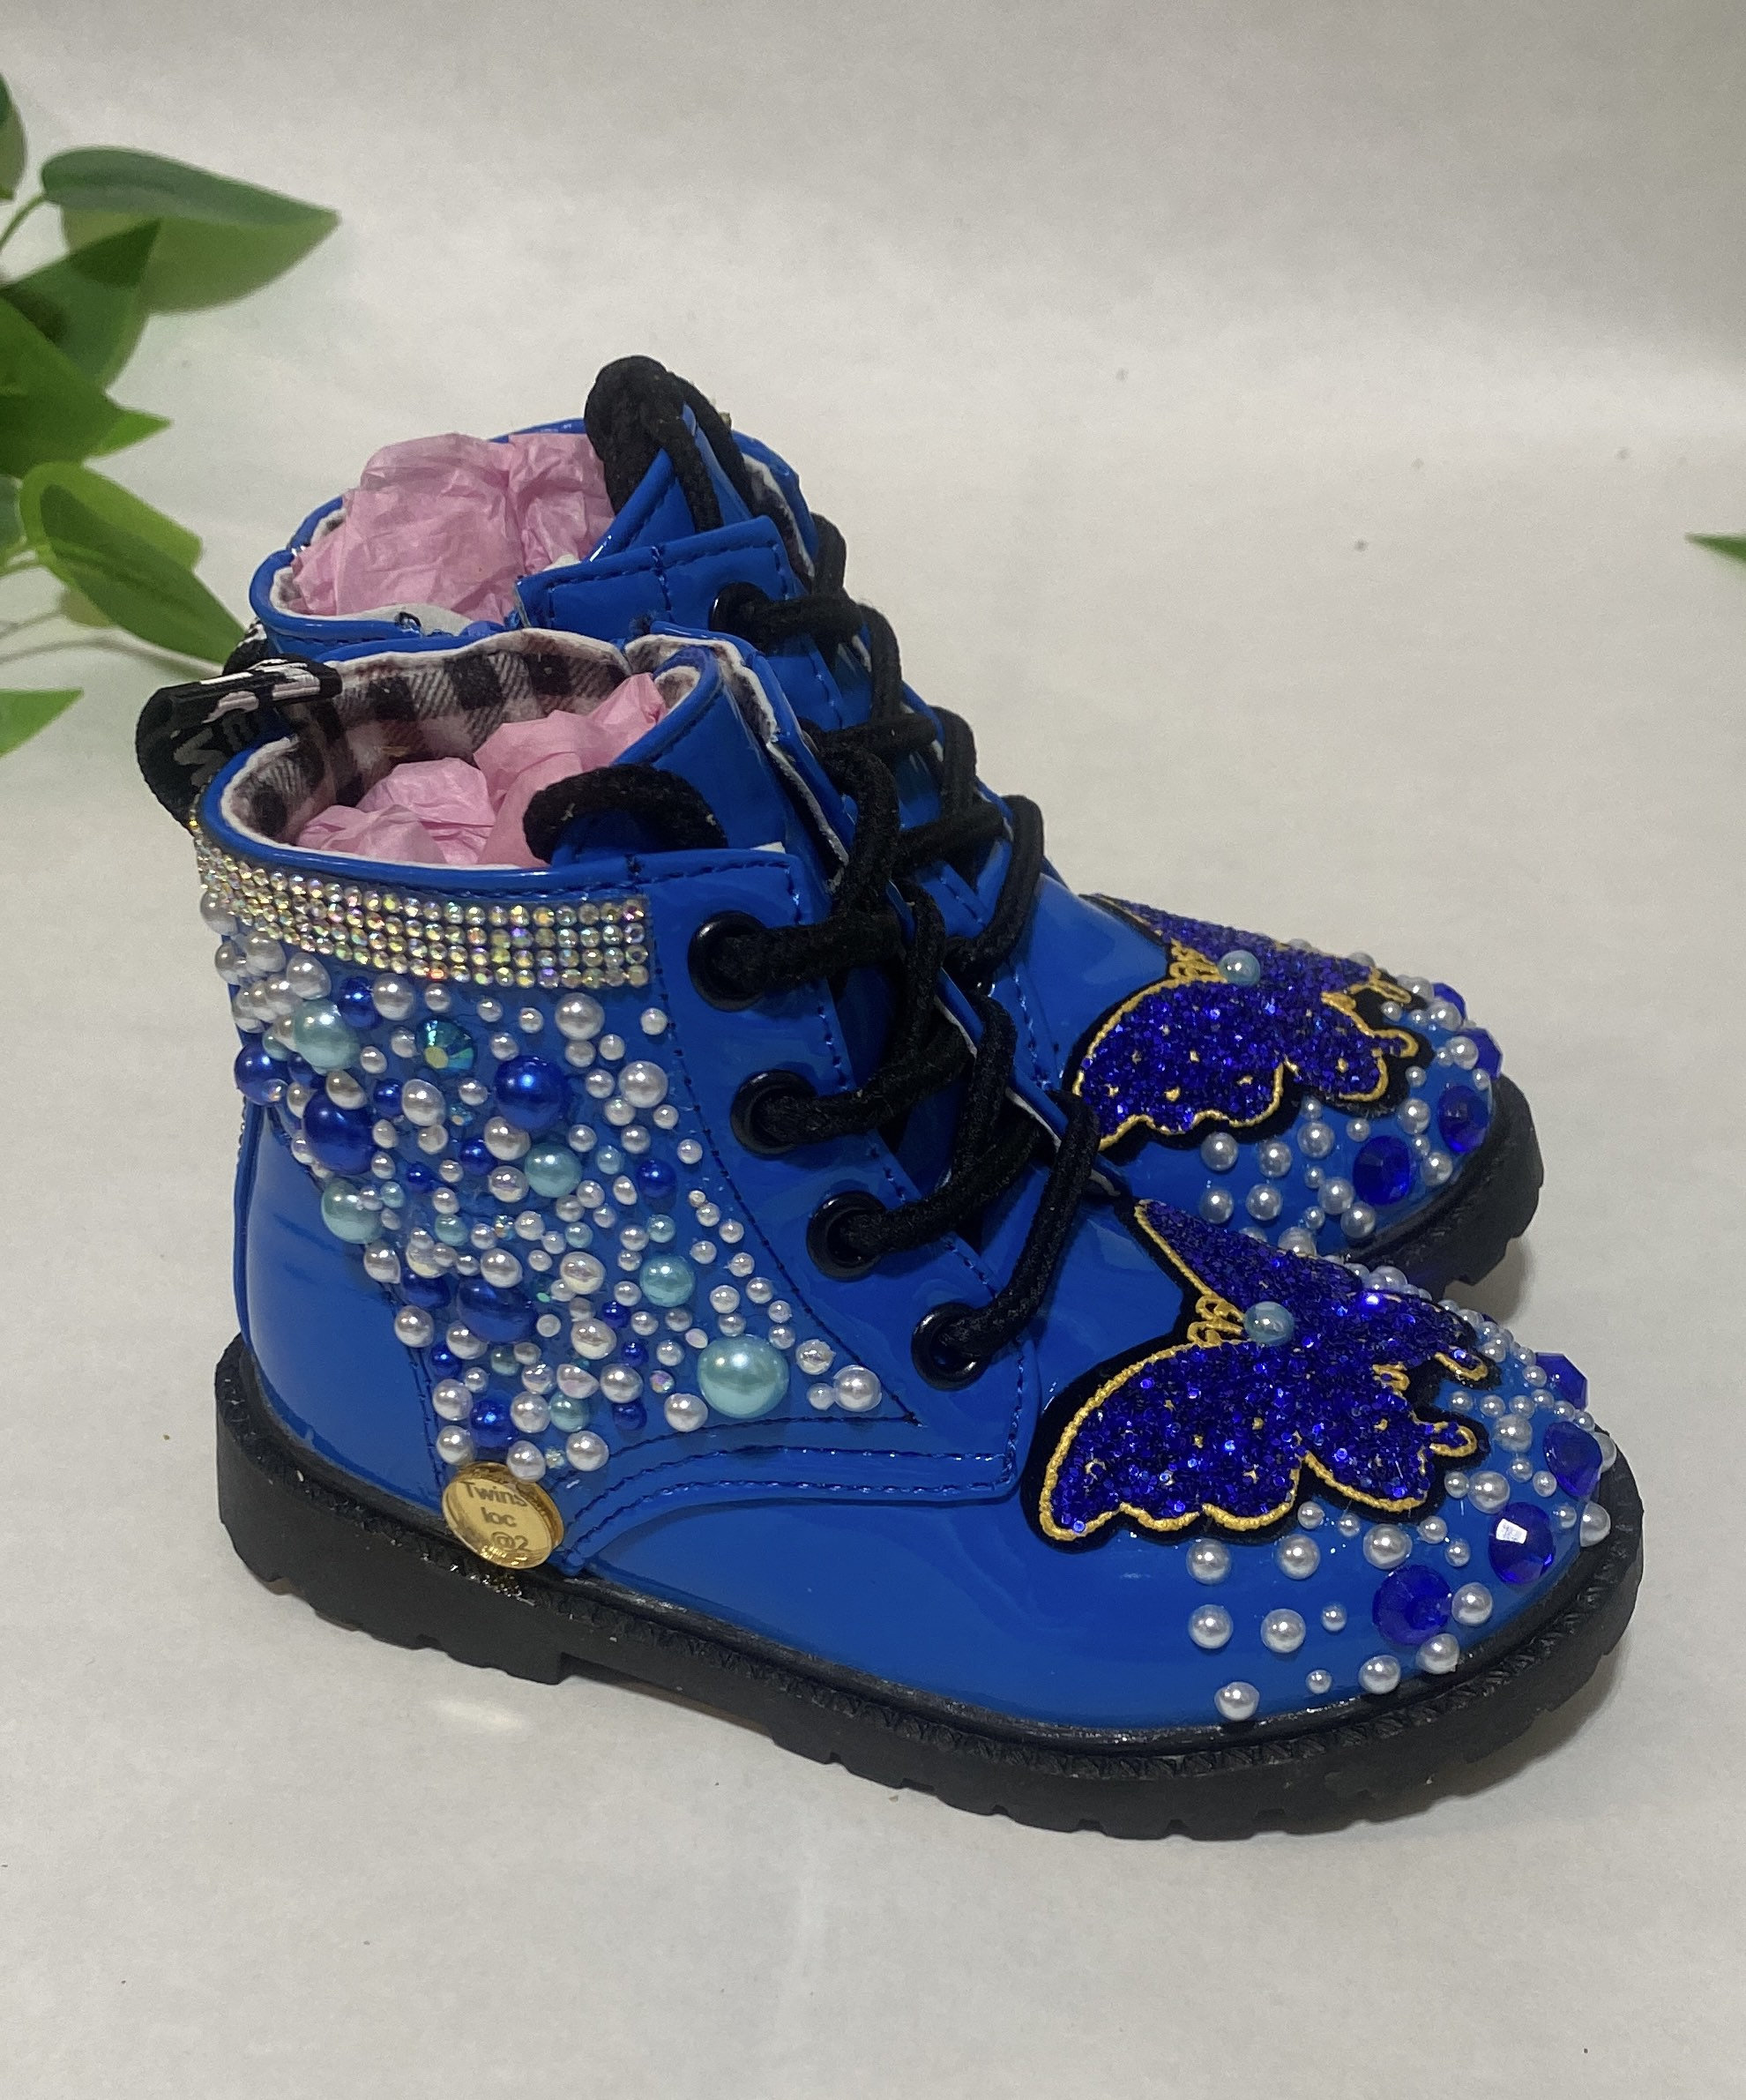 JDEFEG Glitter Every Step Boots Toddler Kids Baby Boys Girls Shoes